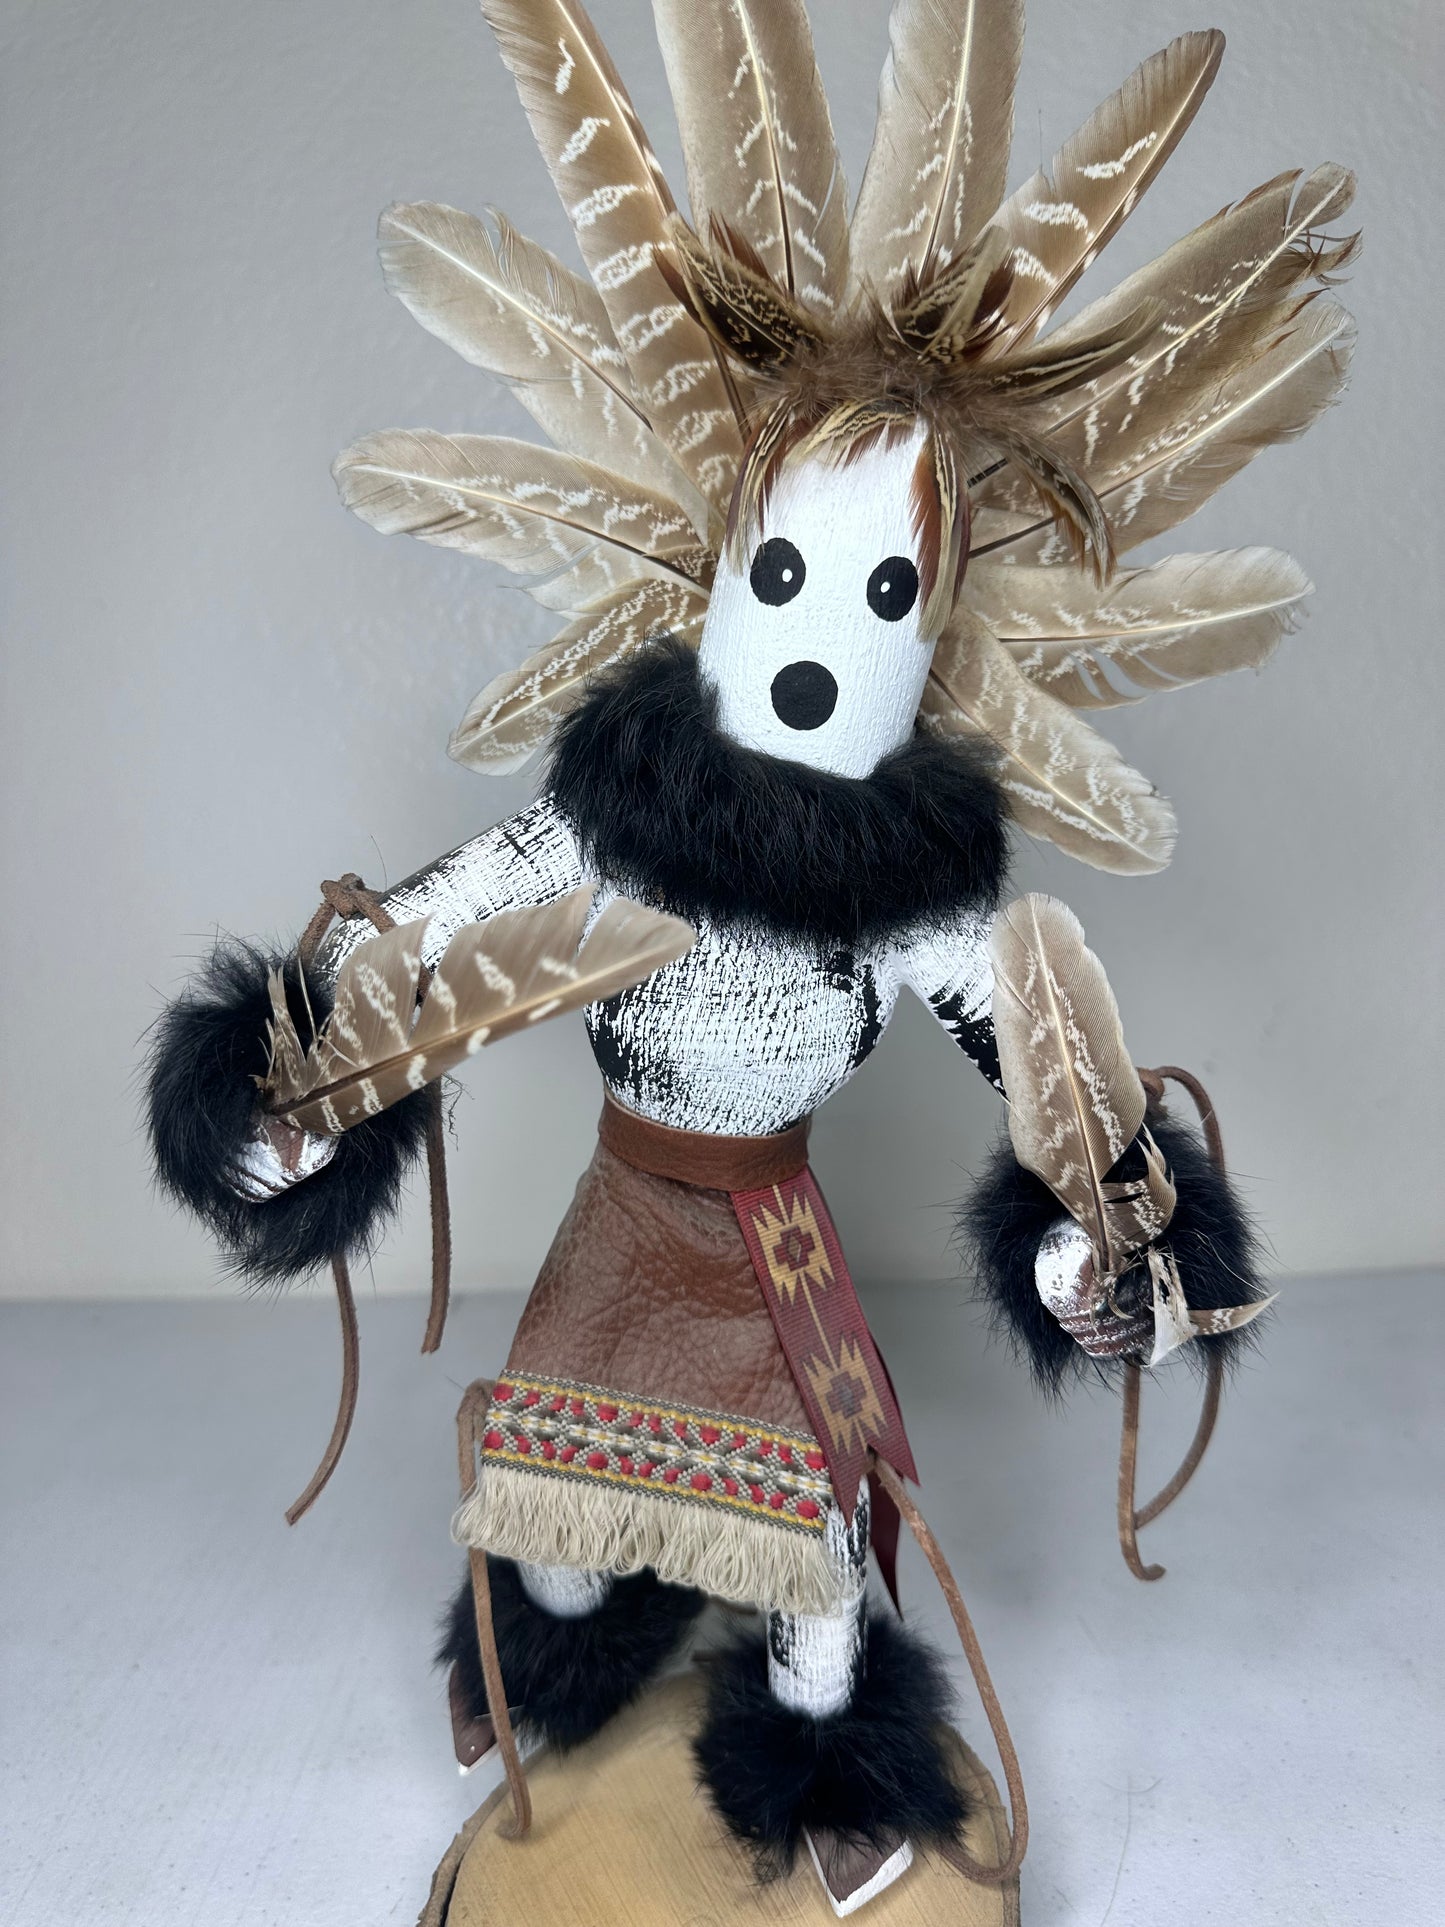 Eoto Kachina 19” Doll by Little Dove (2008) - Authentic Native American Art